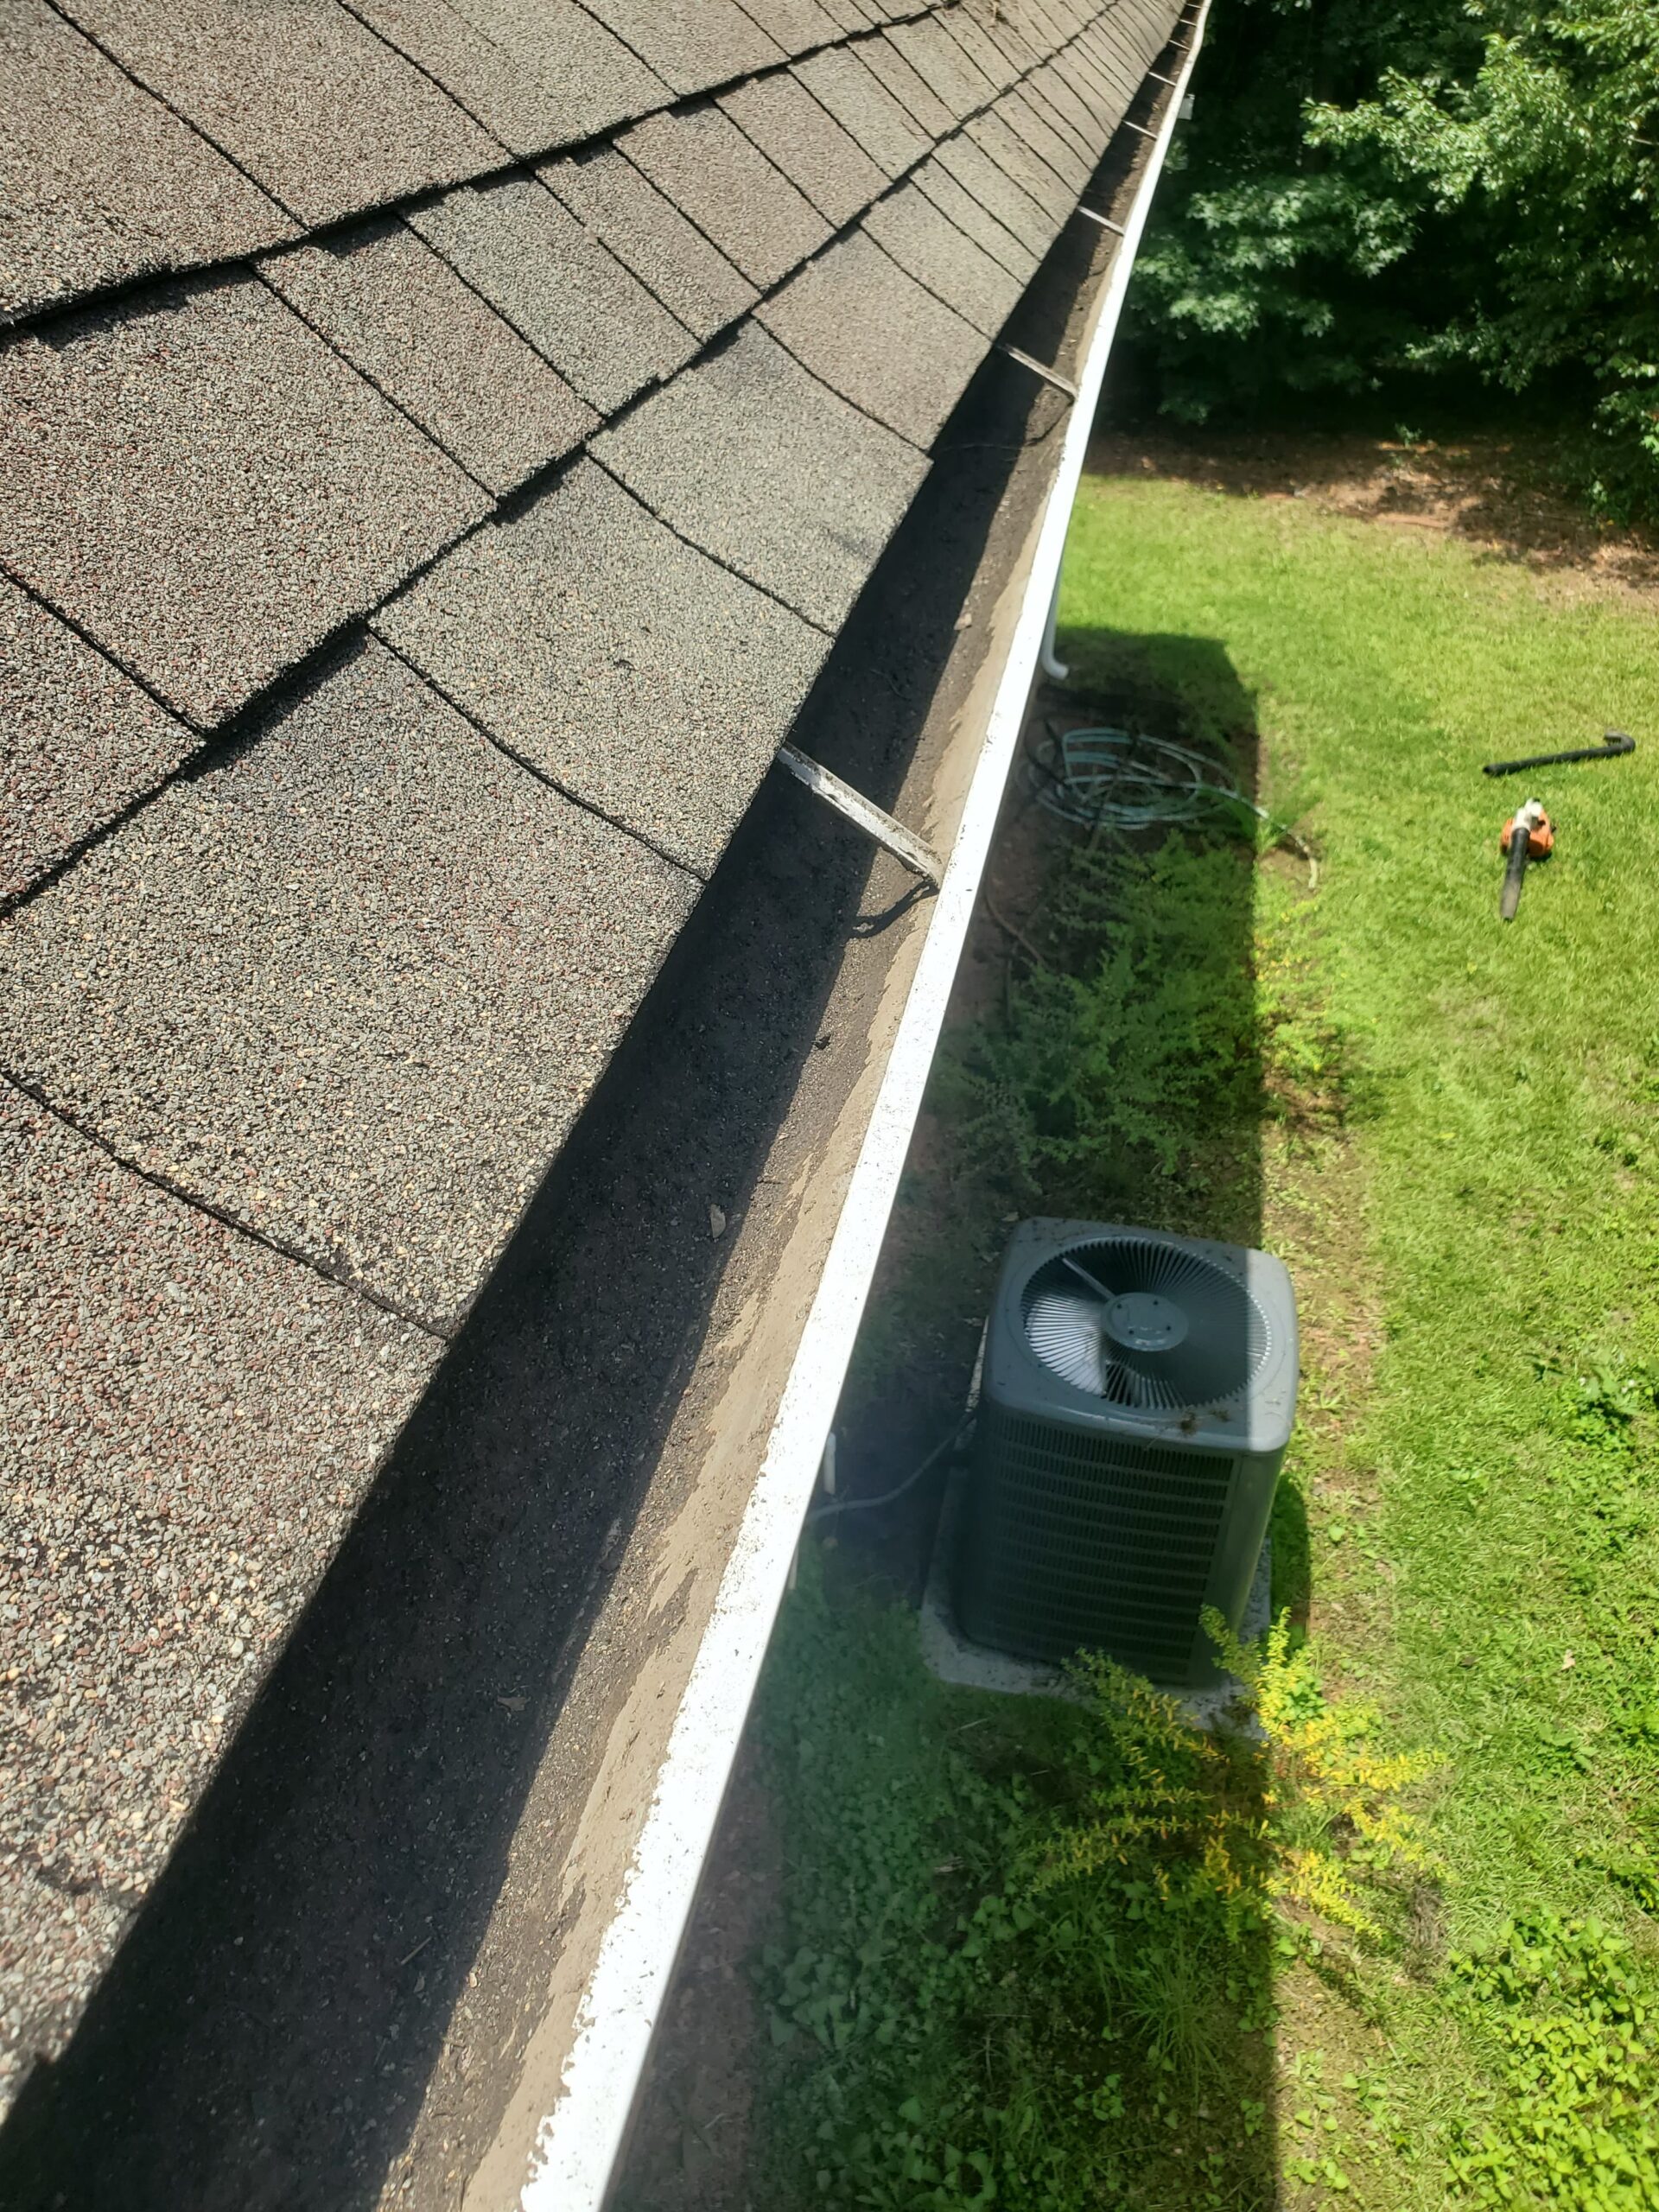 Gutter Cleaning Company Indianapolis In